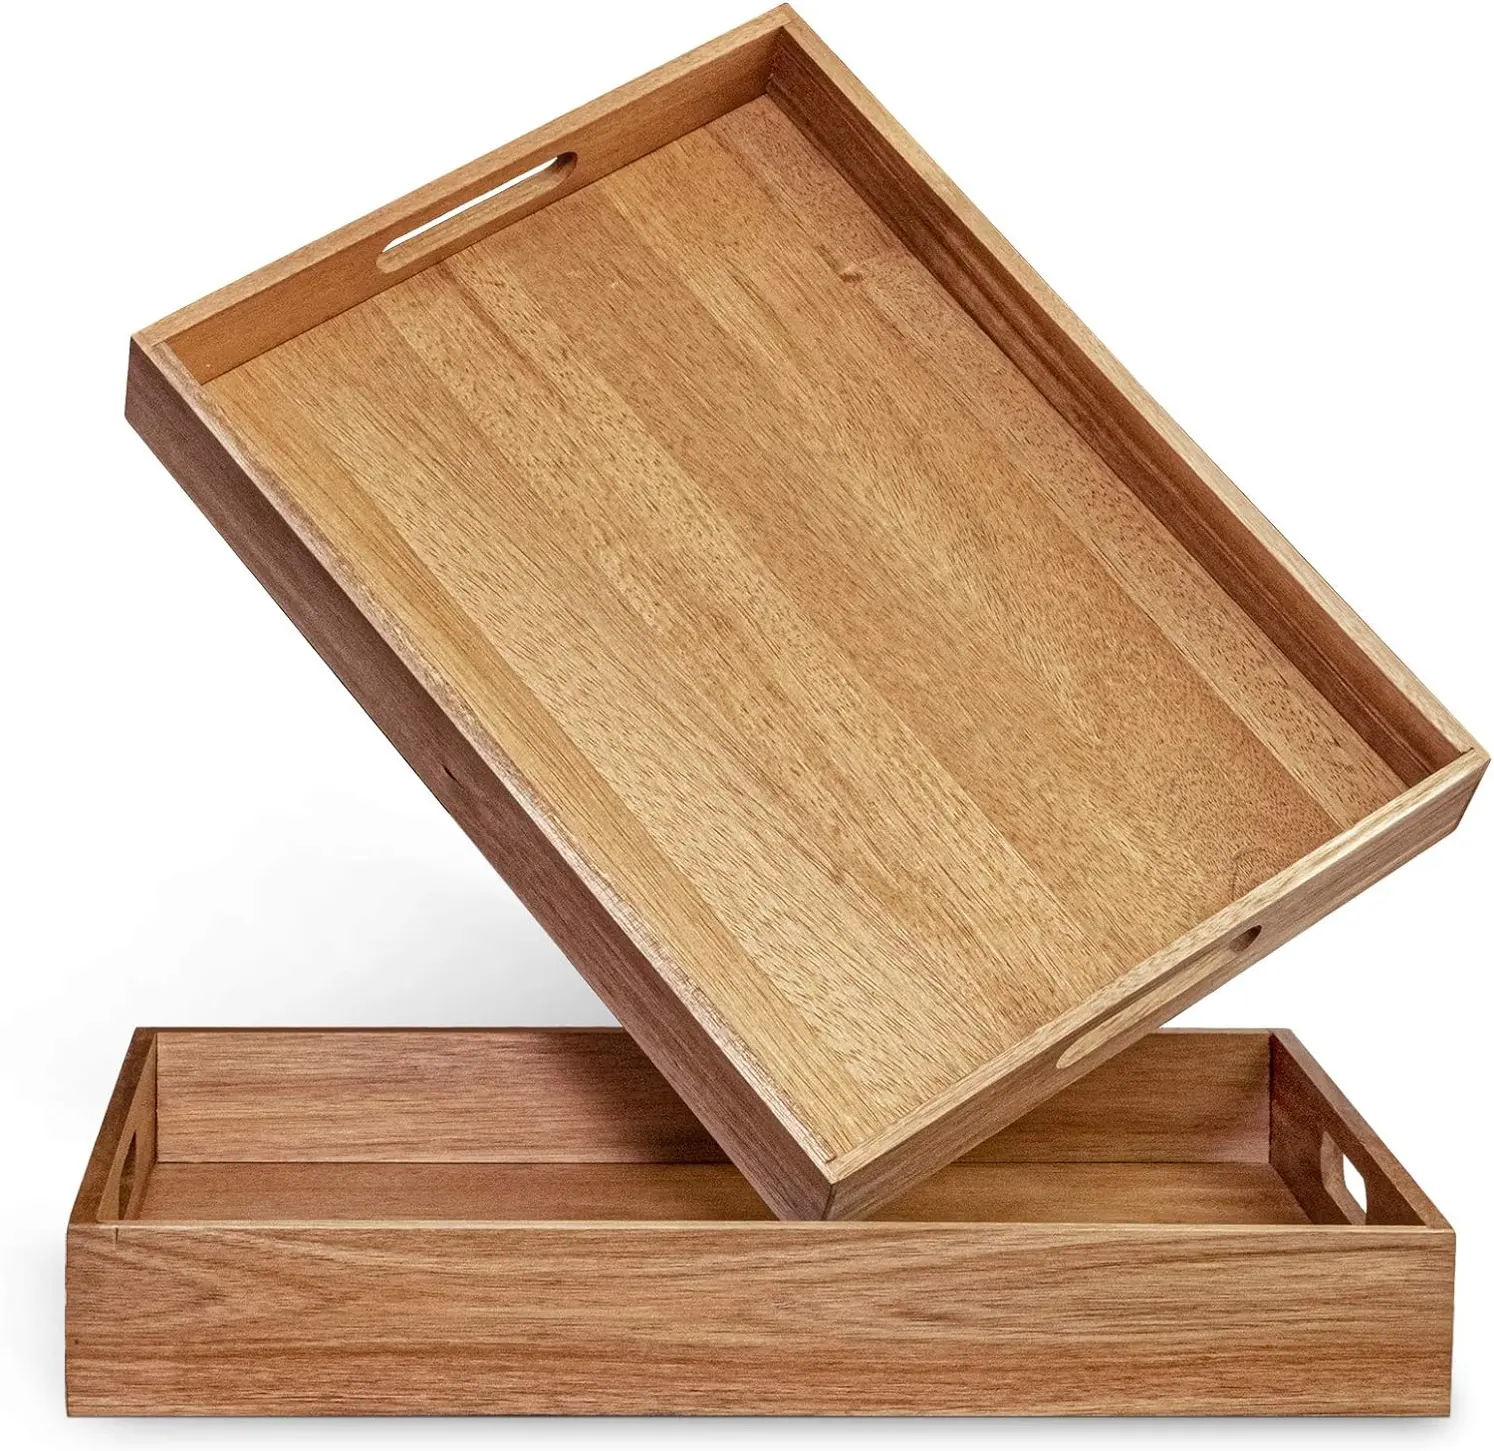 Jewellery Wooden Serving Tray High Quality Handmade Top Design Modern Accent Usable Tray Hot Selling Serving Tray